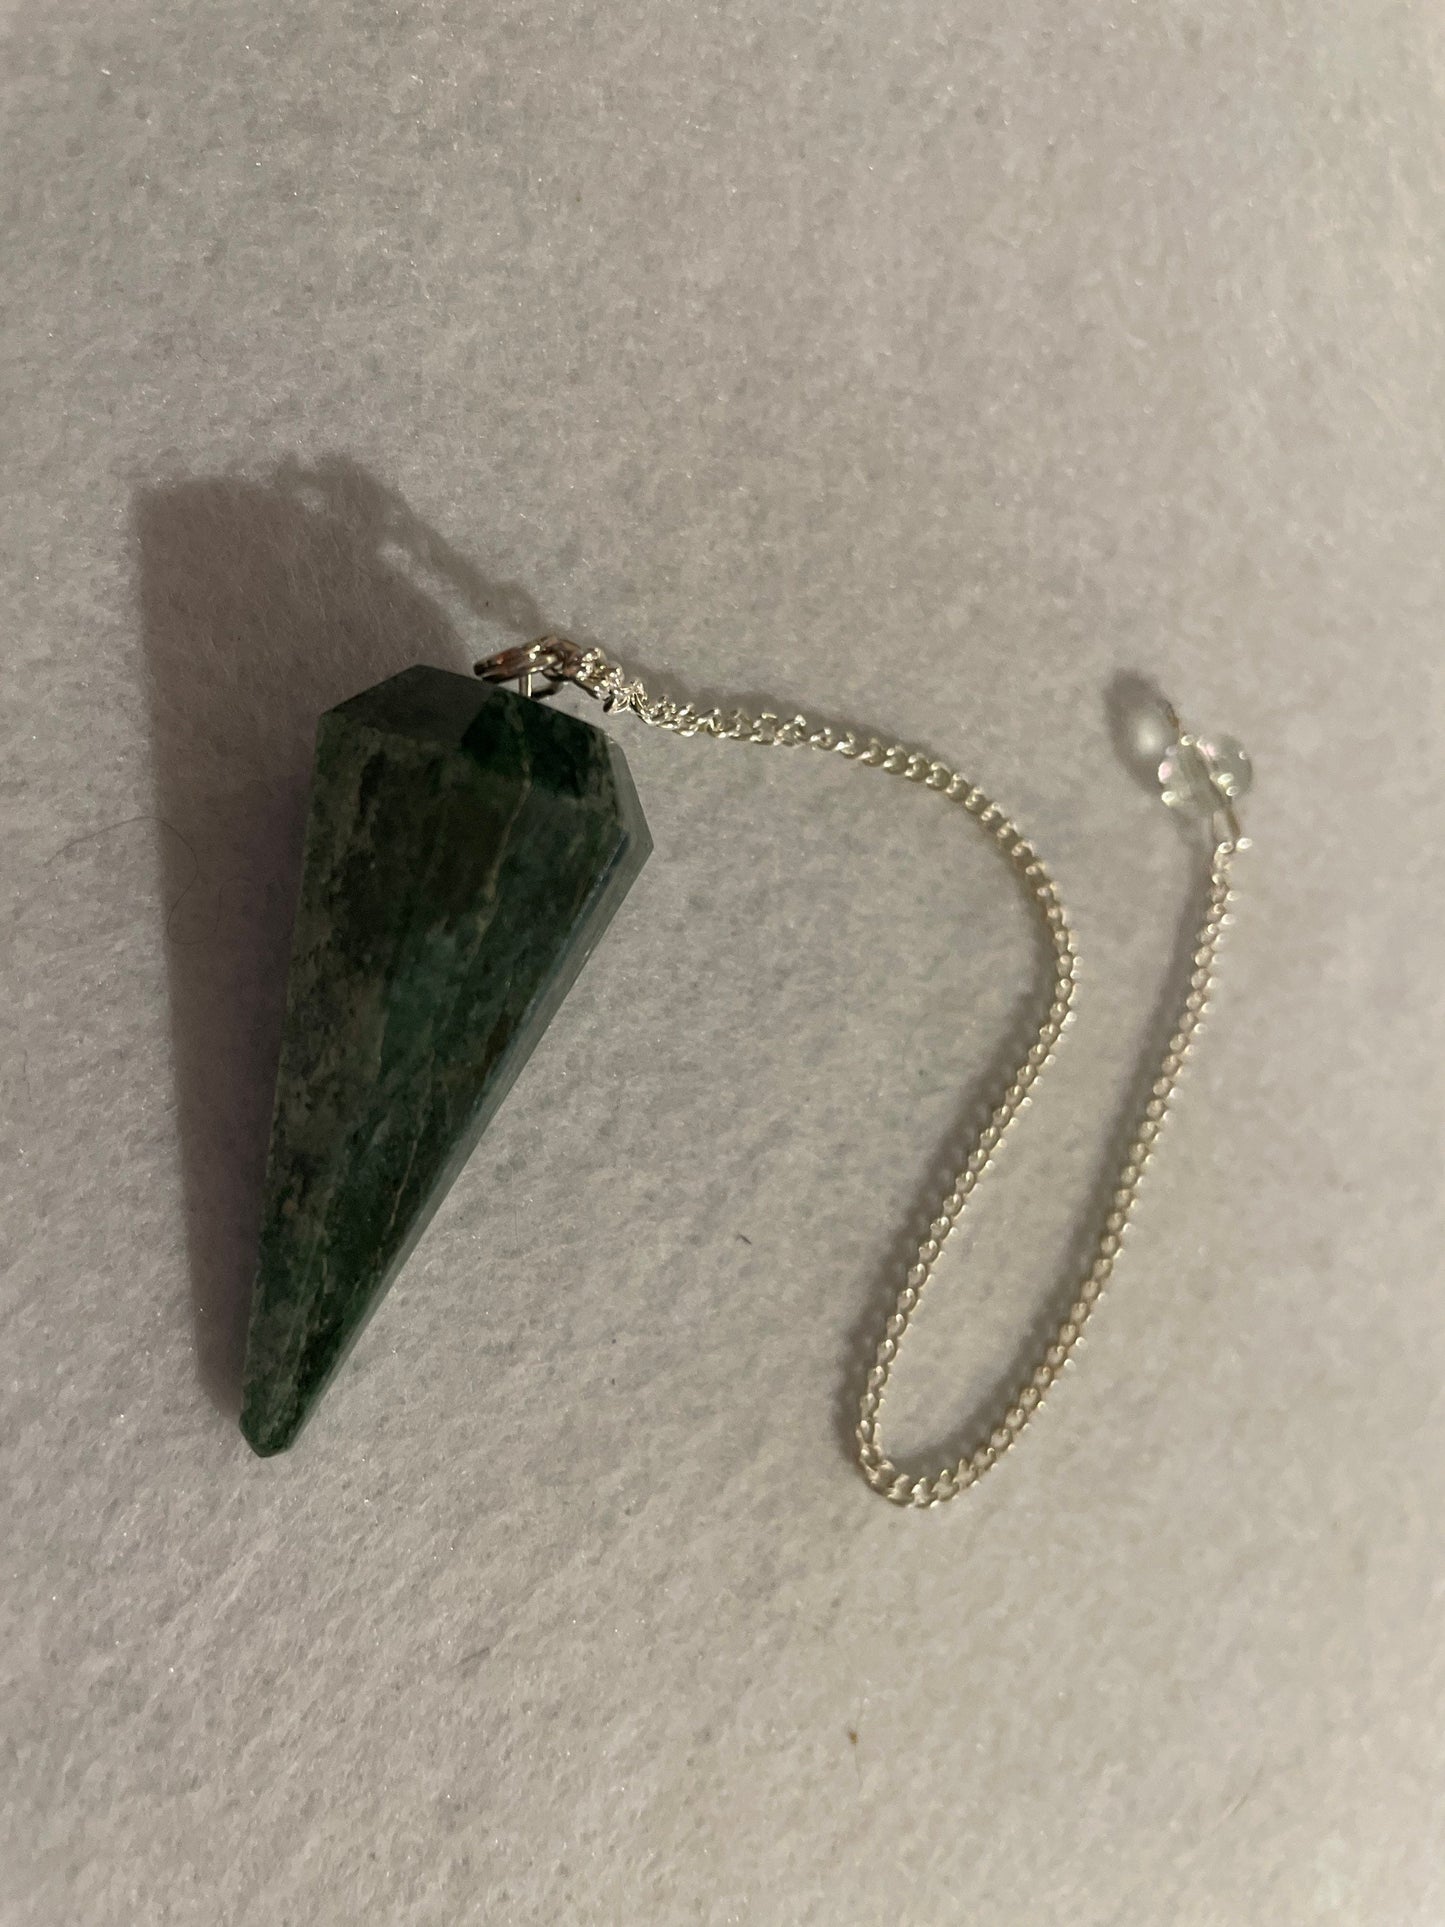 Jade Pendulum is  1.75” and with chain is 8.5”